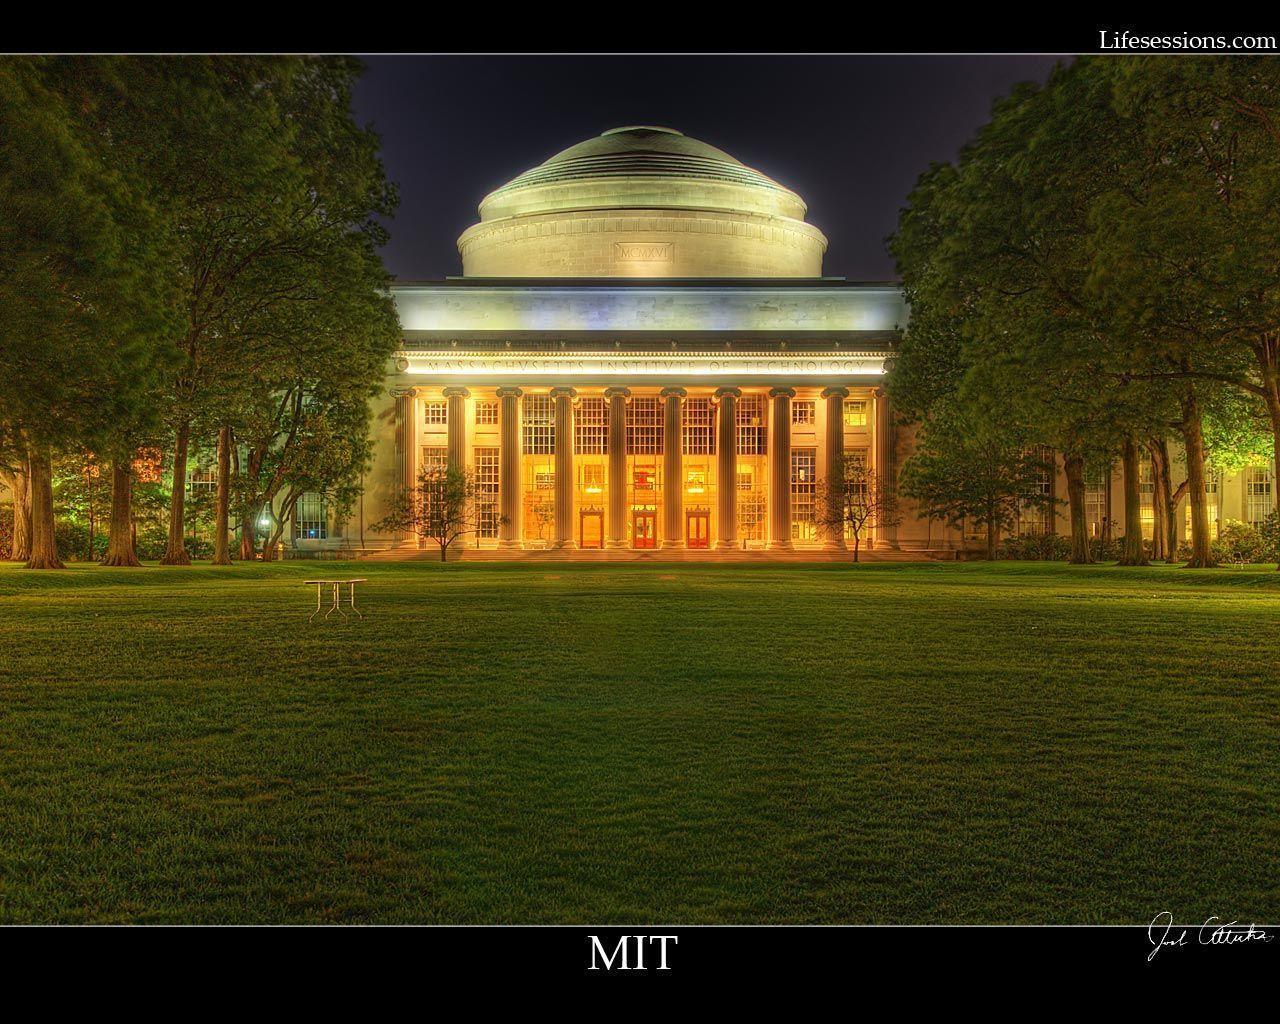 Gallery For Gt Mit Wallpaper